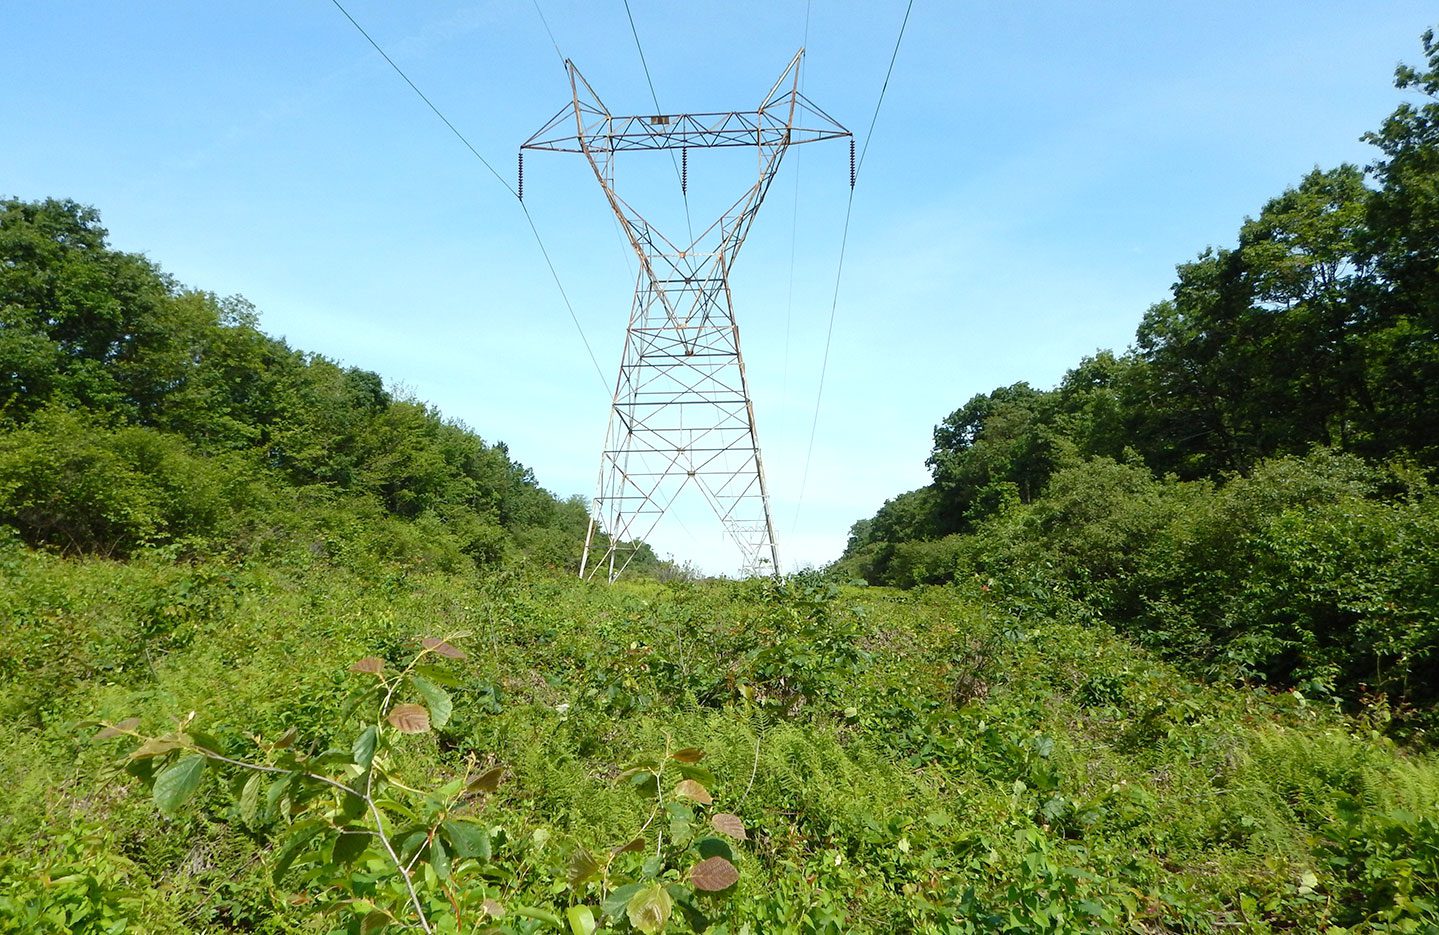 Utility right-of-way lands, such as this powerline corridor in Pennsylvania, provide strips of de facto early successional habitat. Photo by Therese Boyd/Research & Teaching at Penn State Altoona.